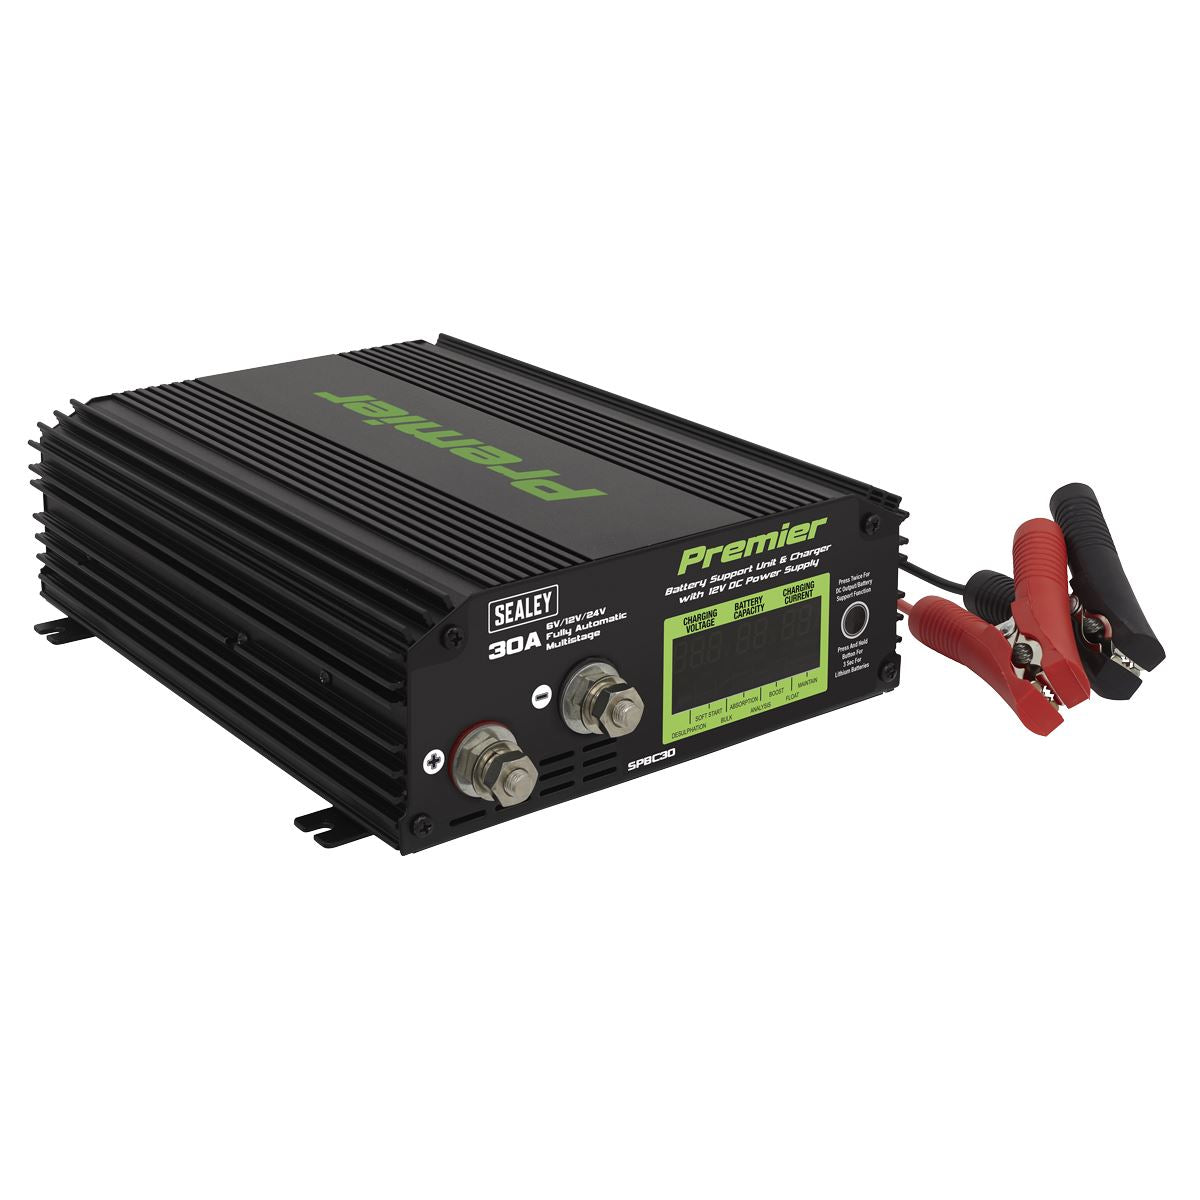 Sealey Premier Battery Support Unit Charger & Maintainer 30A